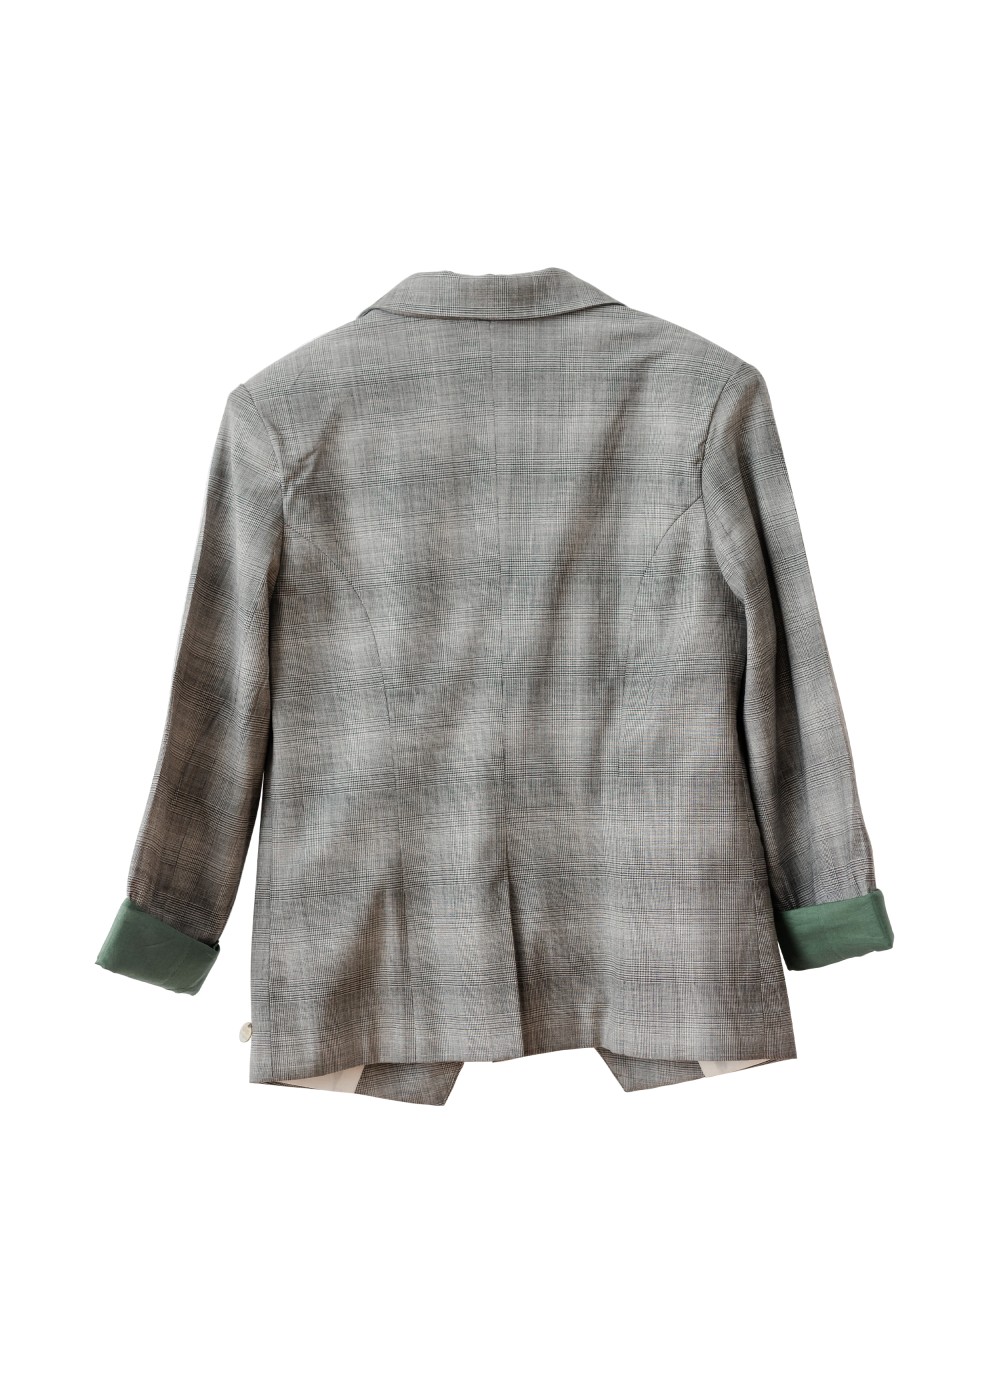 FINN WOOL BLENDED BLAZER WITH CHECK PATTERN